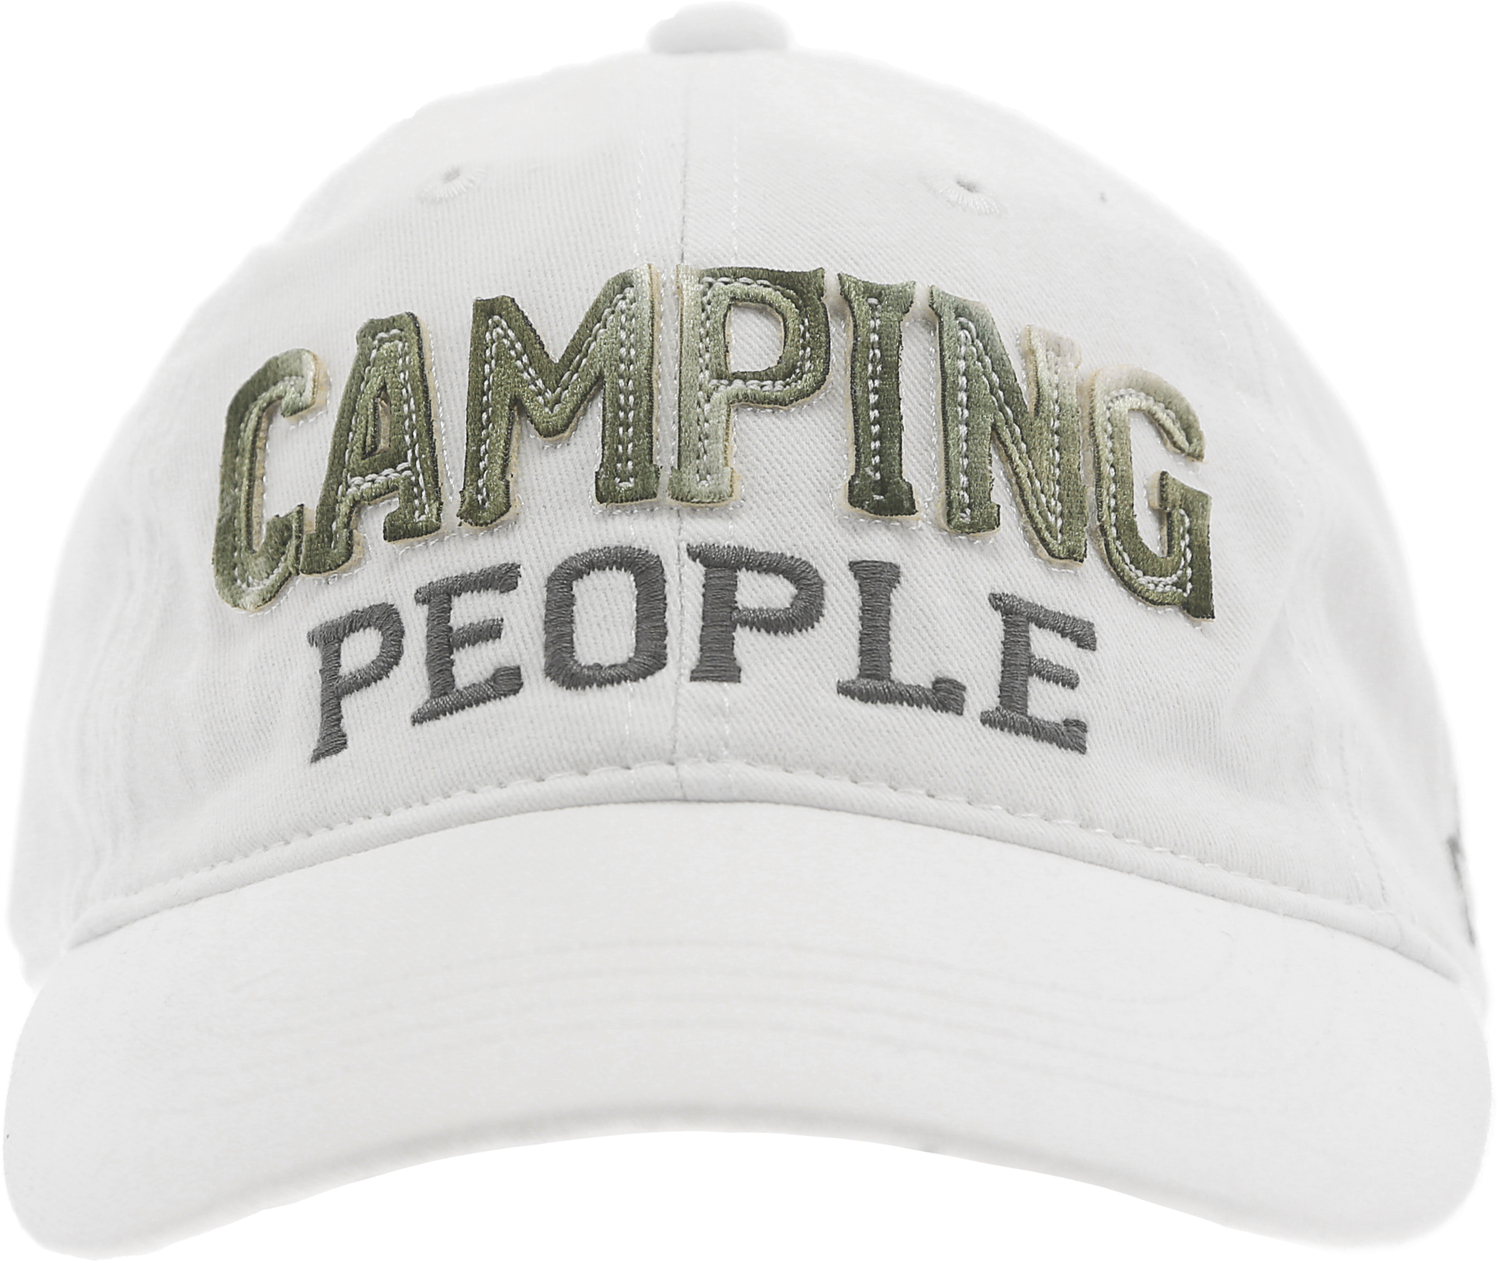 Camping People by We People - Camping People - White Adjustable Hat